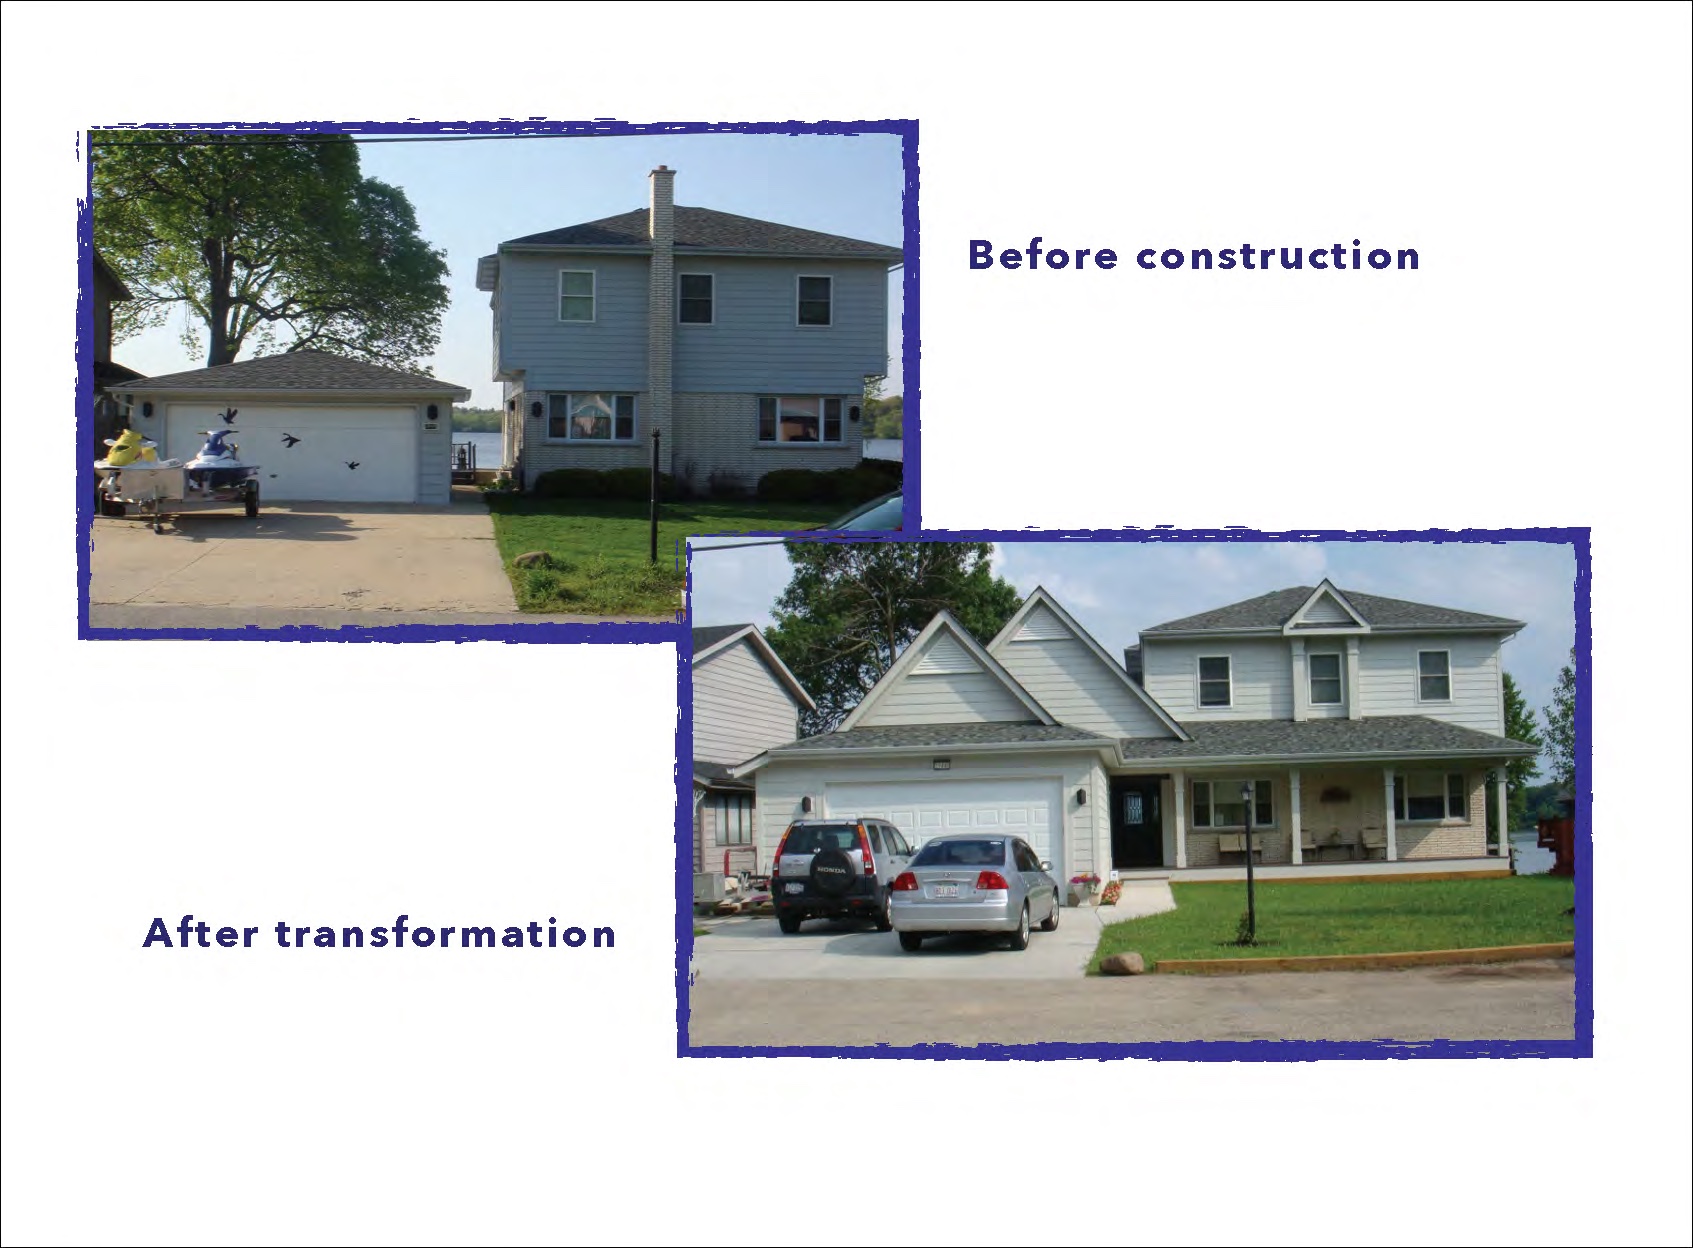 Residential Transformation Architecture before-after